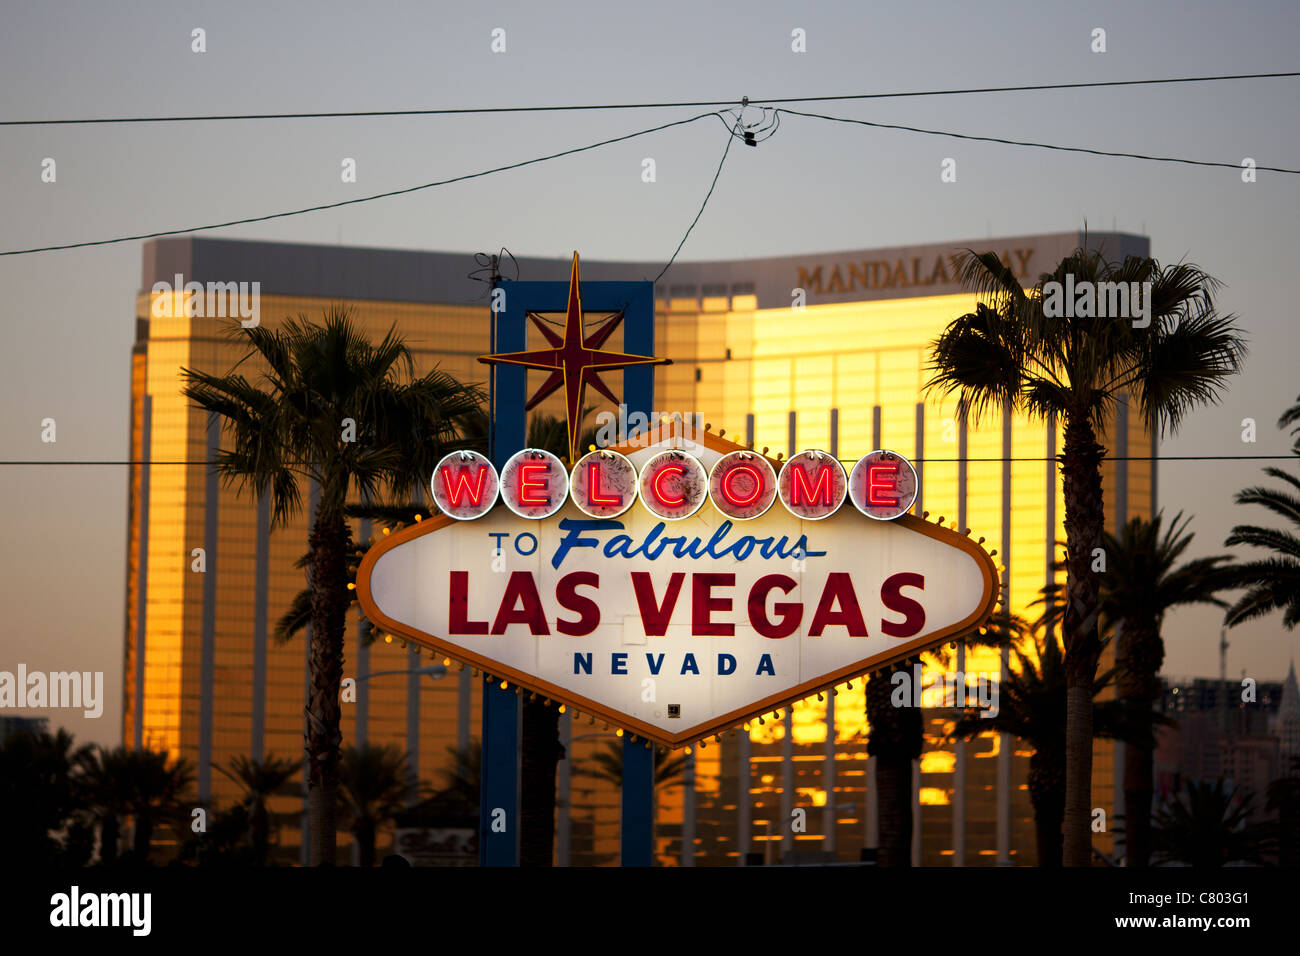 Welcome to Fabulous Las Vegas Sign. The glowing, out of focus Mandalay Bay Resort at sunset highlights the famous sign. Clark County, Nevada, USA. Stock Photo